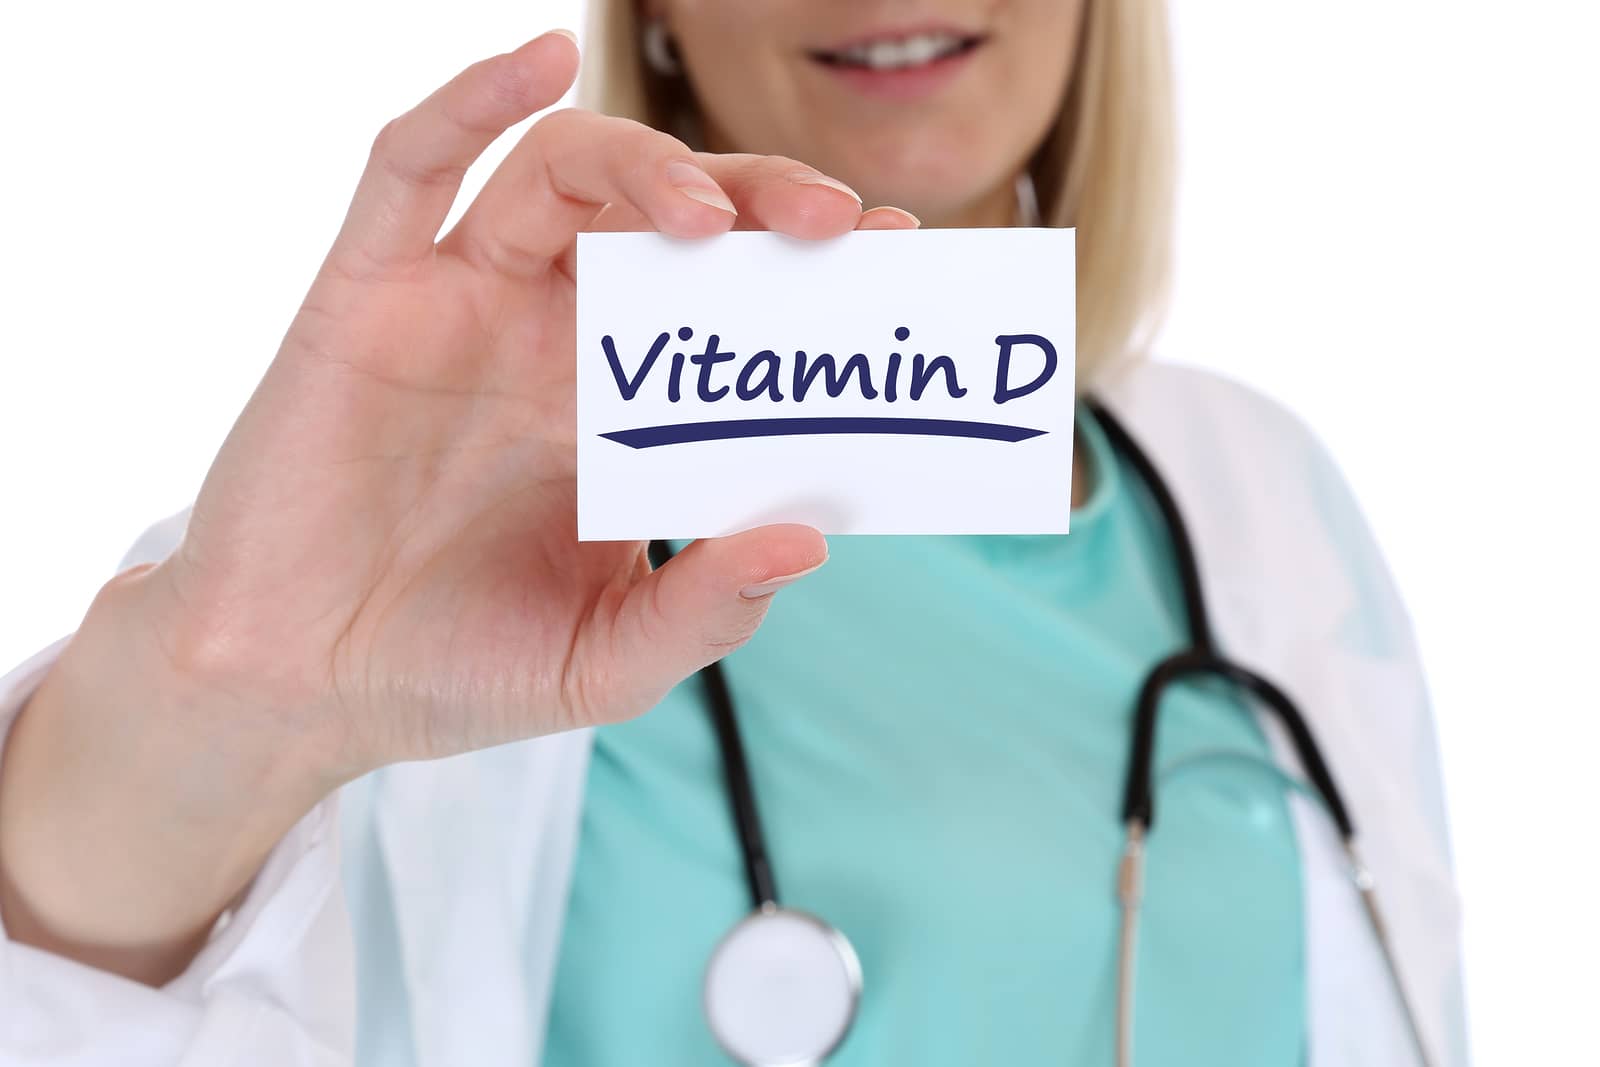 Can Vitamin D deficiency cause tremors?